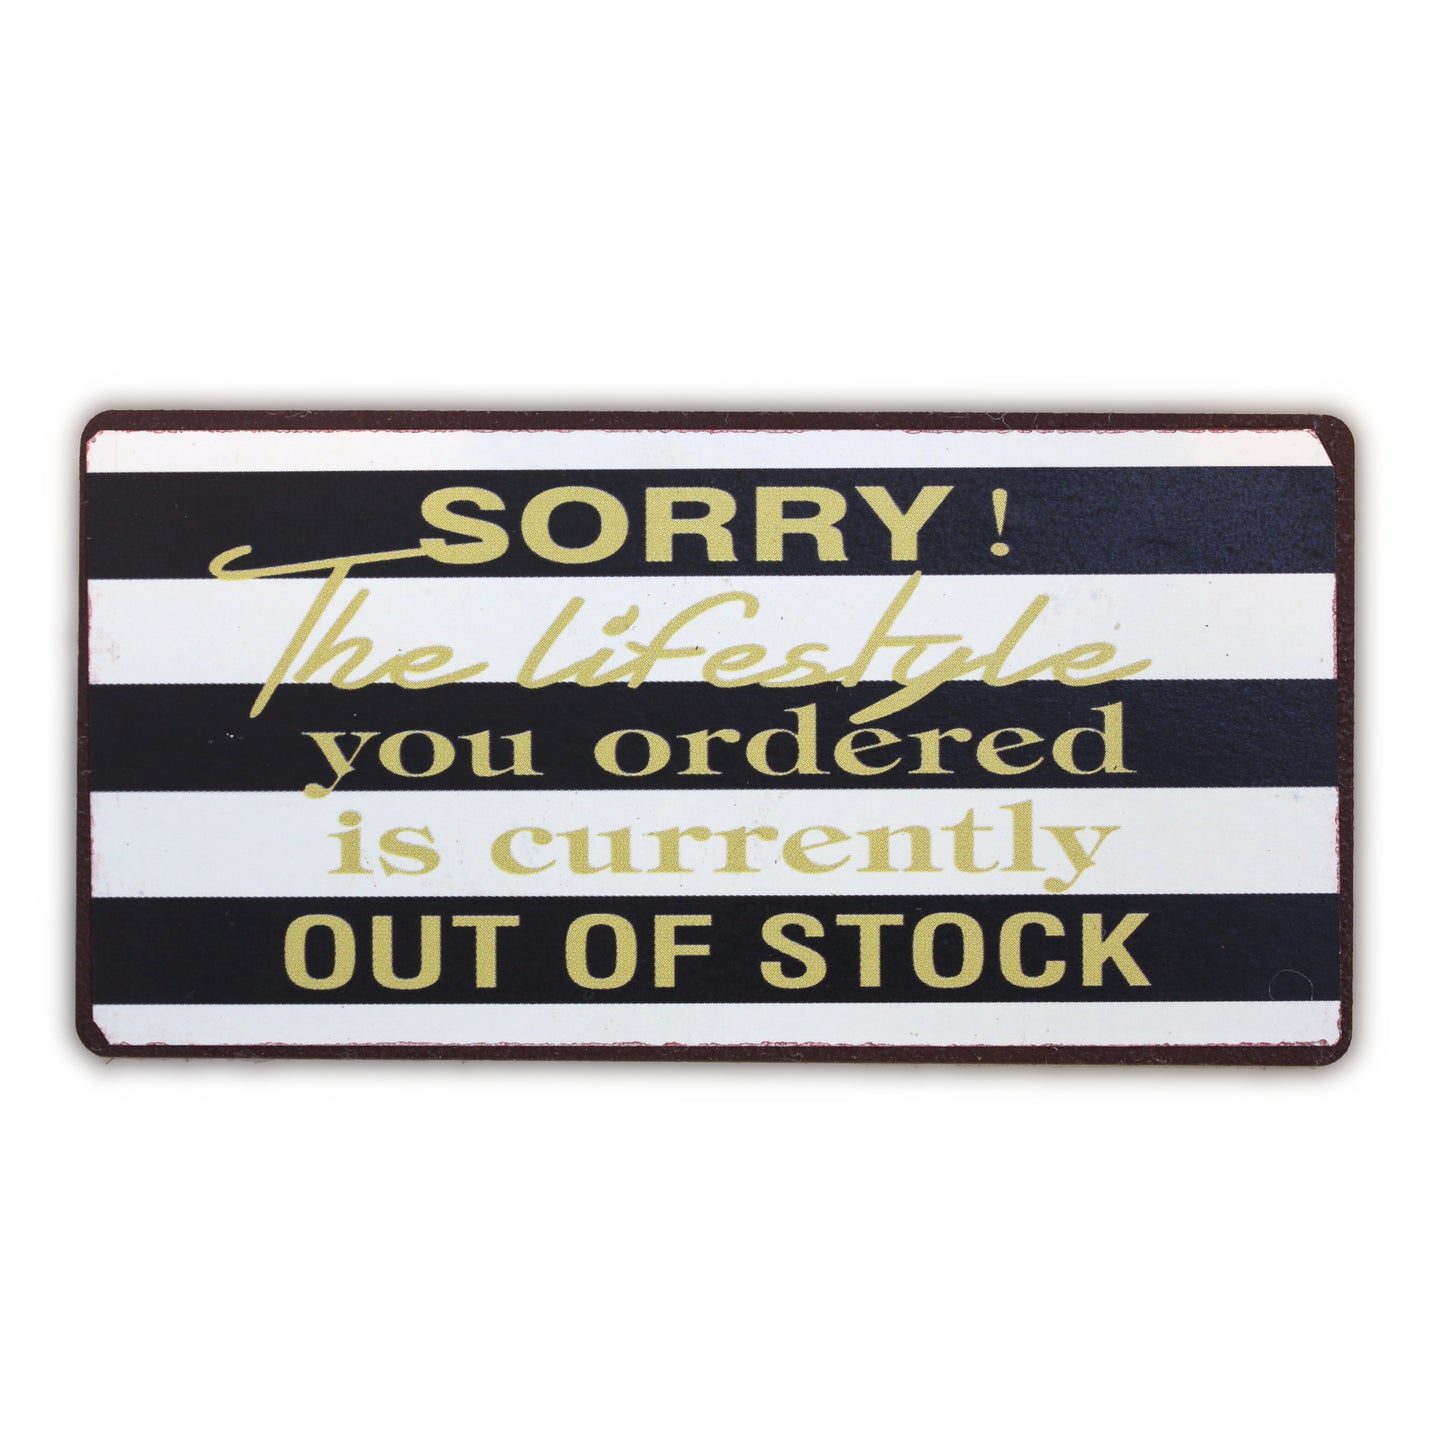 Magnet: Sorry! The lifestyle you ordered is currently out of stock